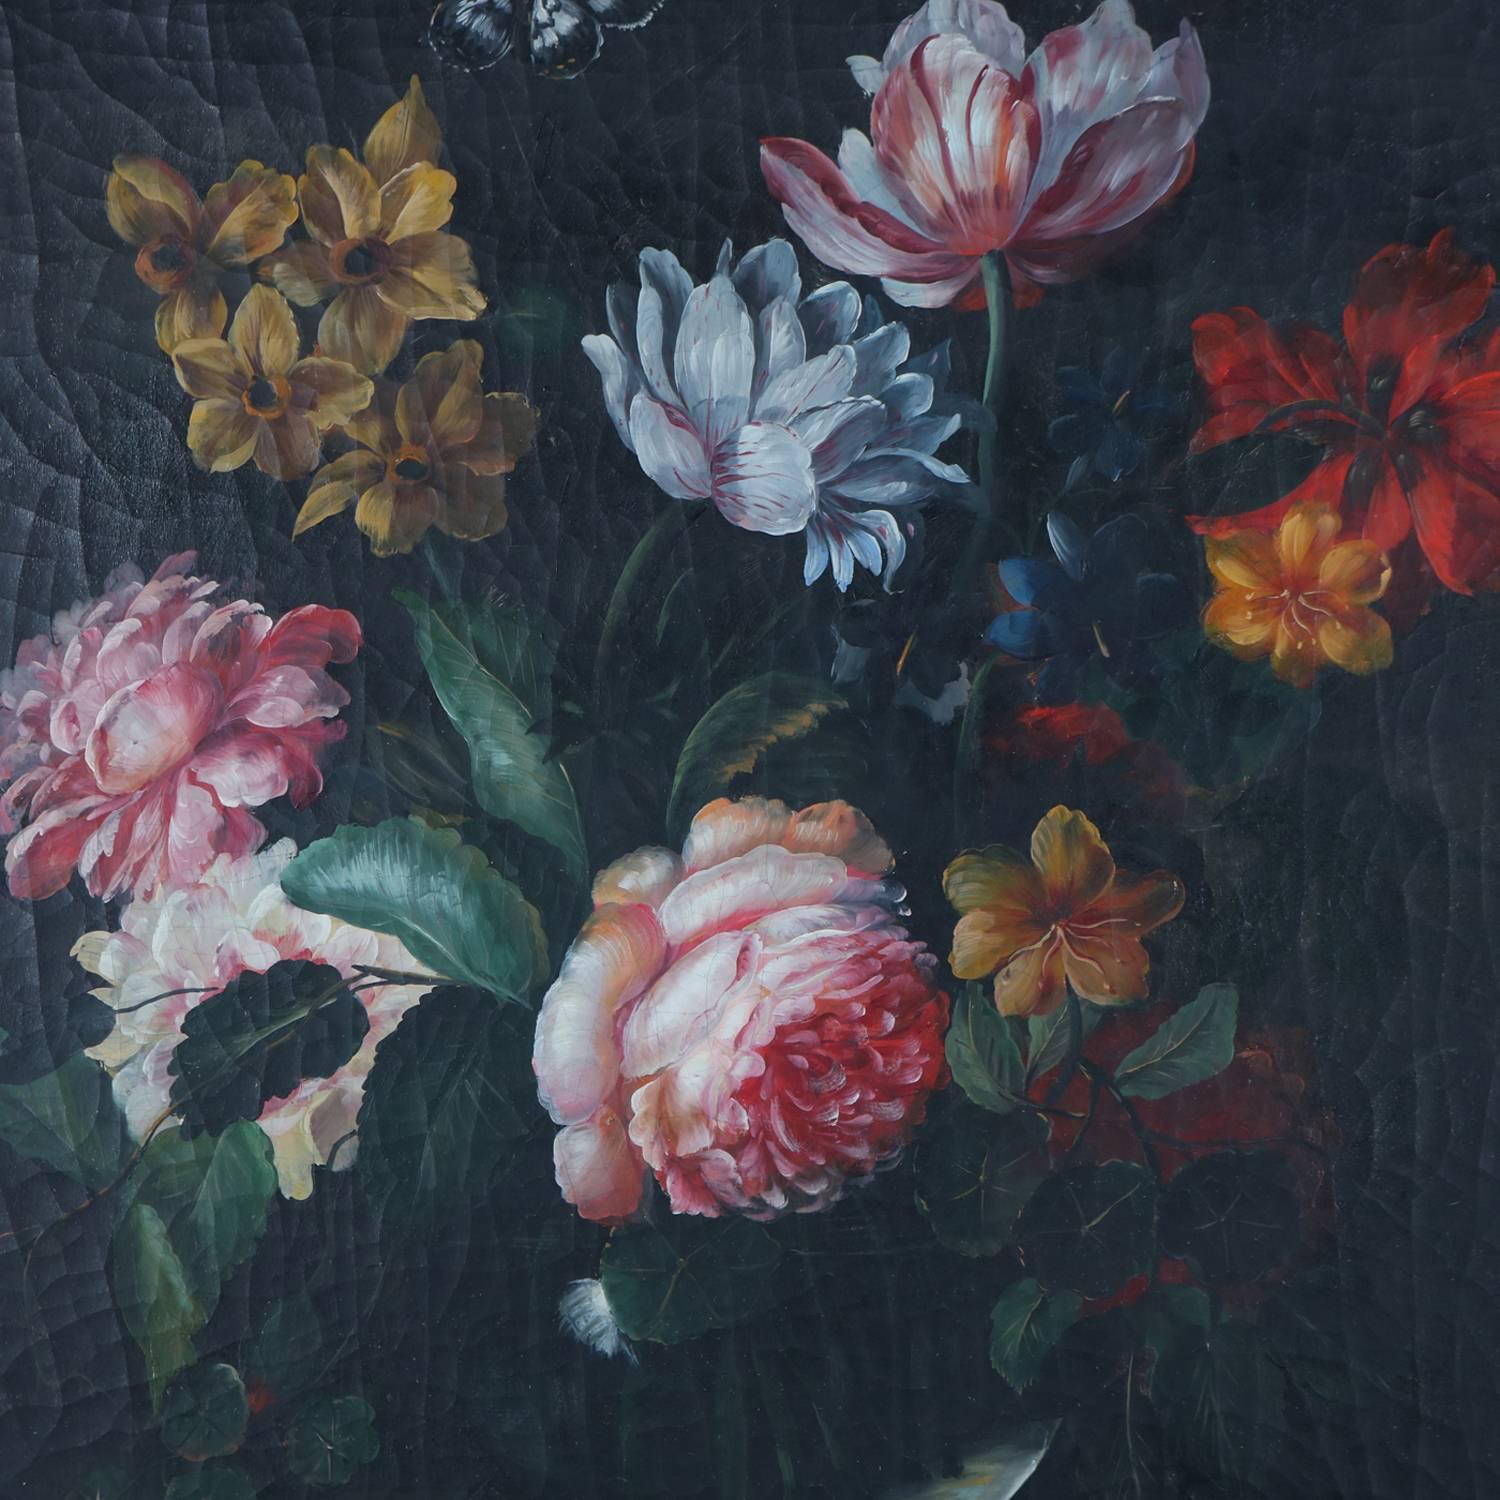 Oil on board still life painting of garden flowers including daffodils and peonies in table vase, seated in giltwood frame, anonymous, 20th century

Measures - frame 31